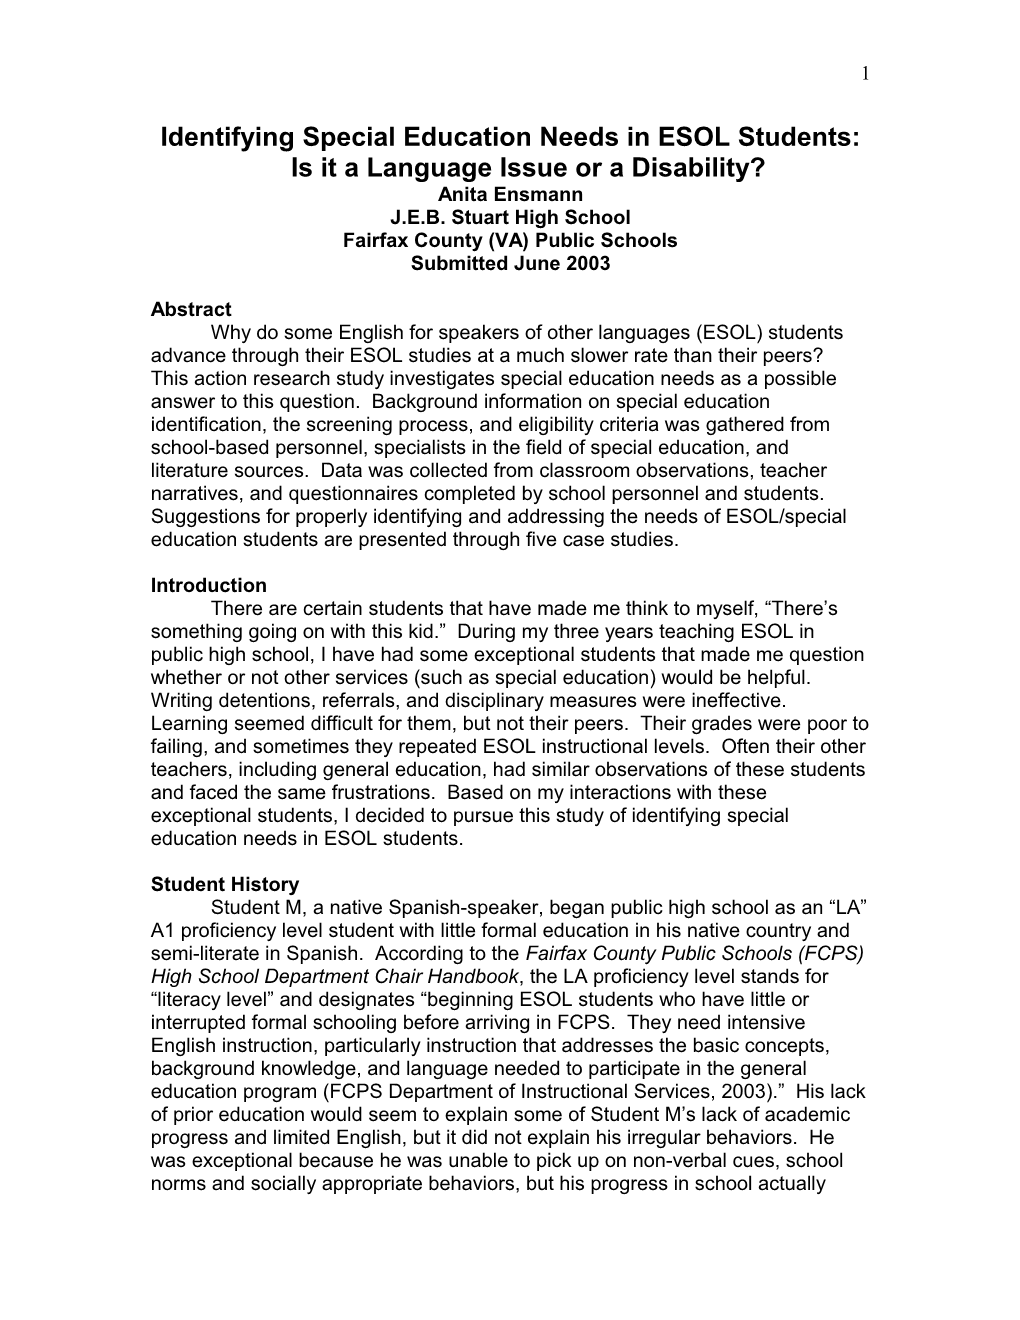 Identifying Special Education Needs in ESOL Students: Is It a Language Issue Or a Disability